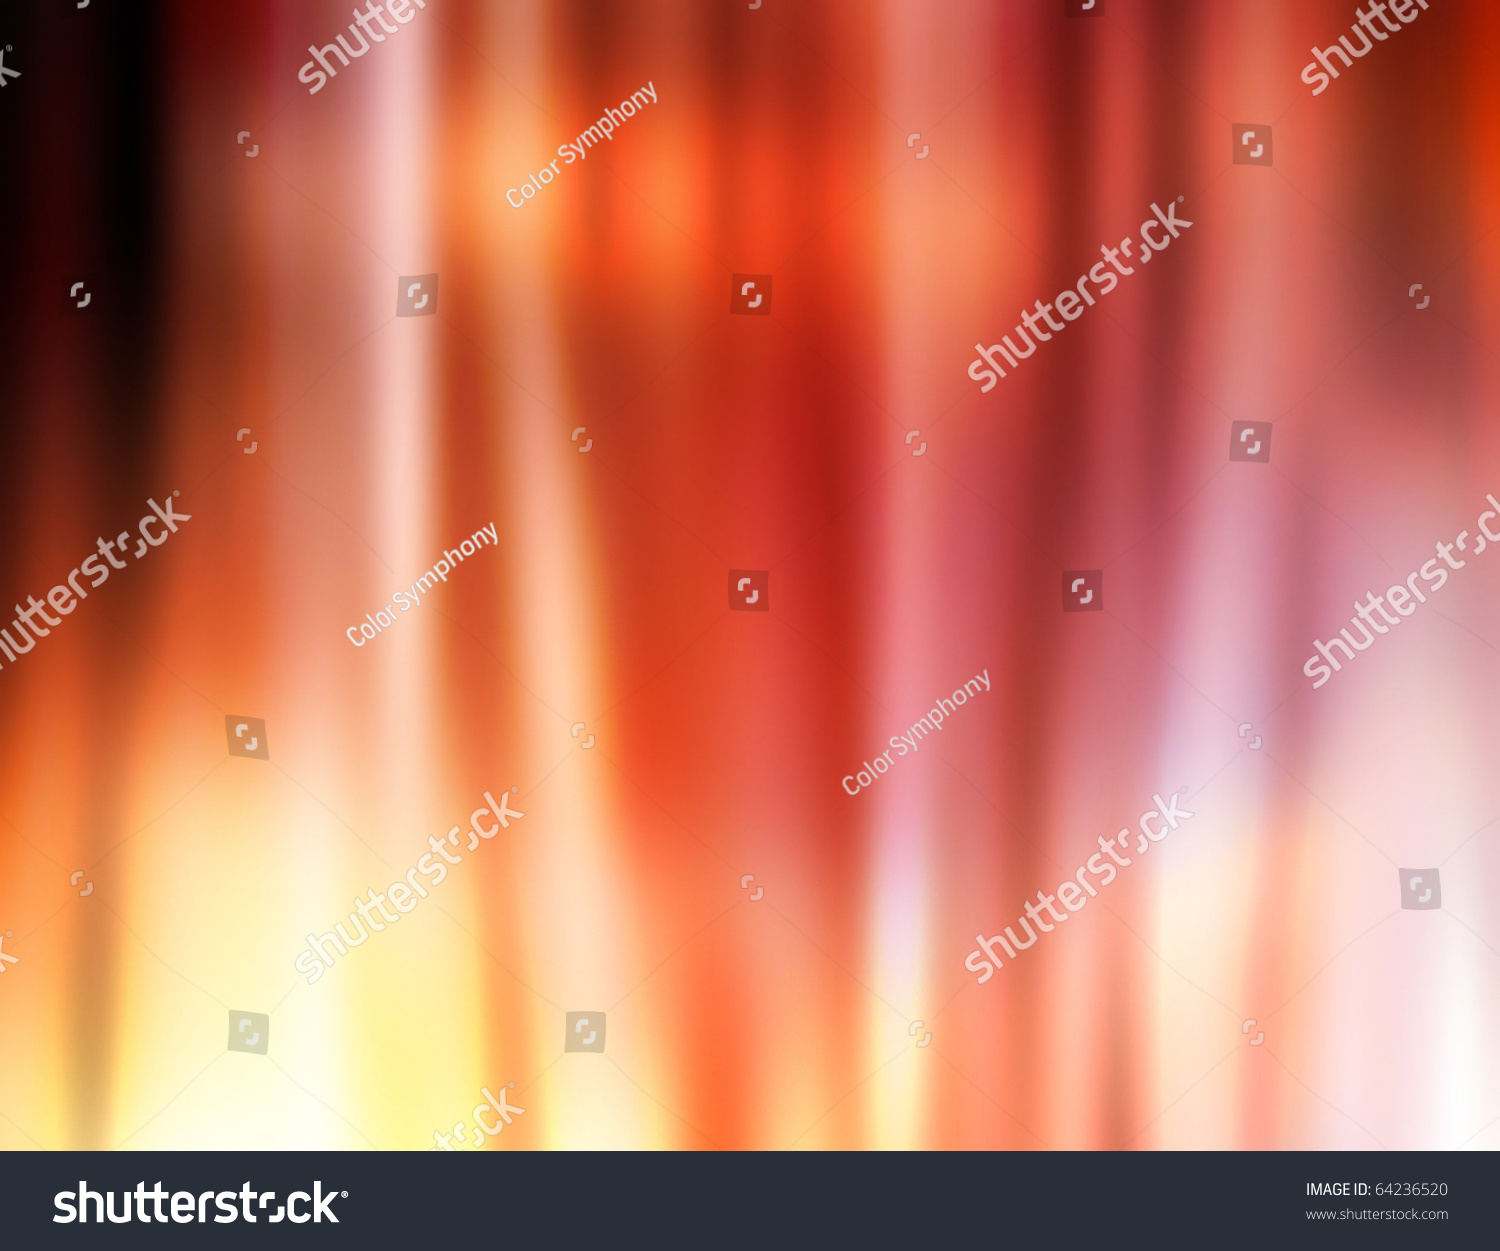 Abstract Smooth Texture Background, Raster Illustration - 64236520 ...